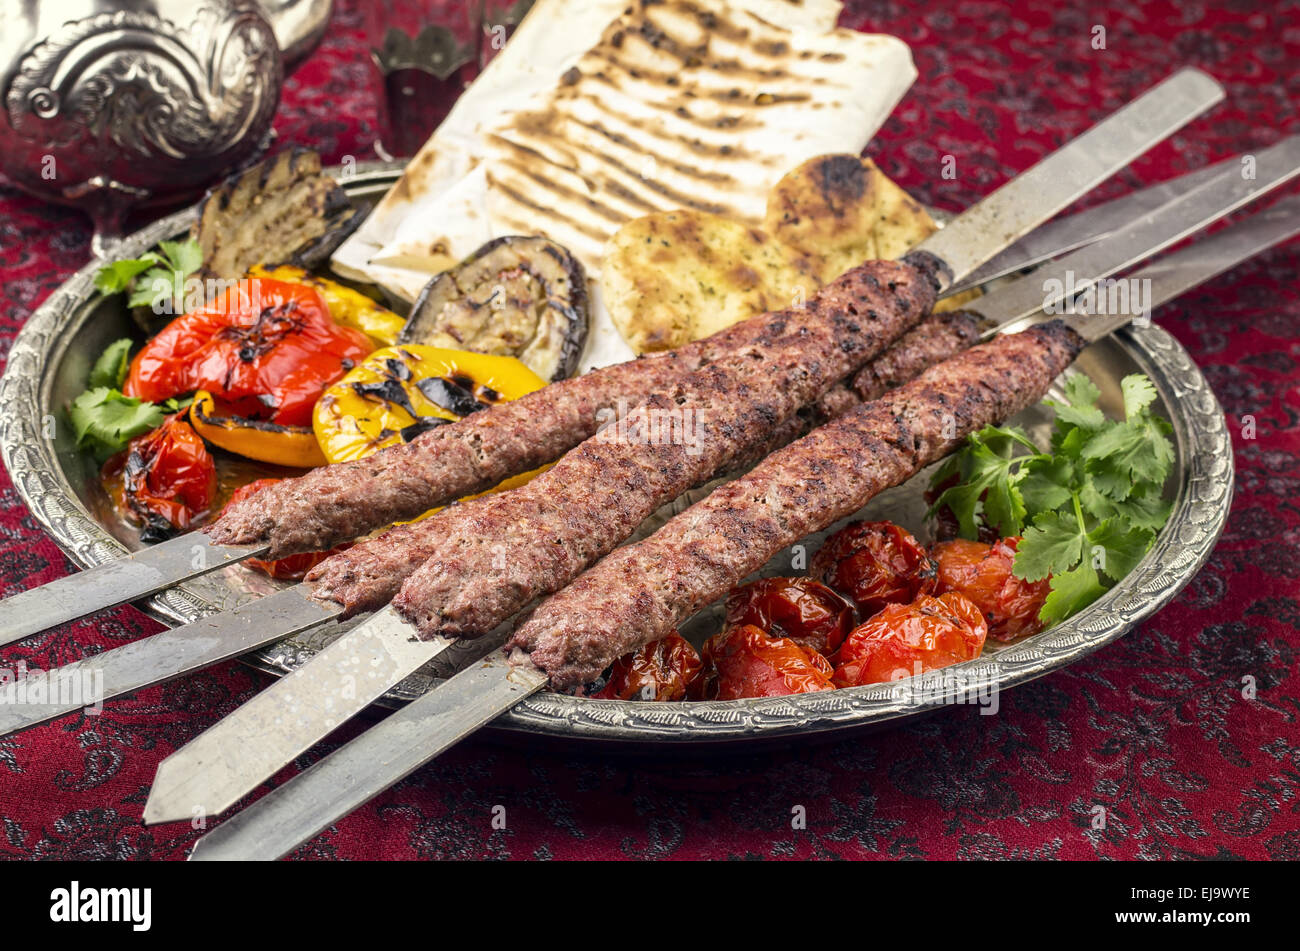 kabab koobideh with grilled vegetables Stock Photo